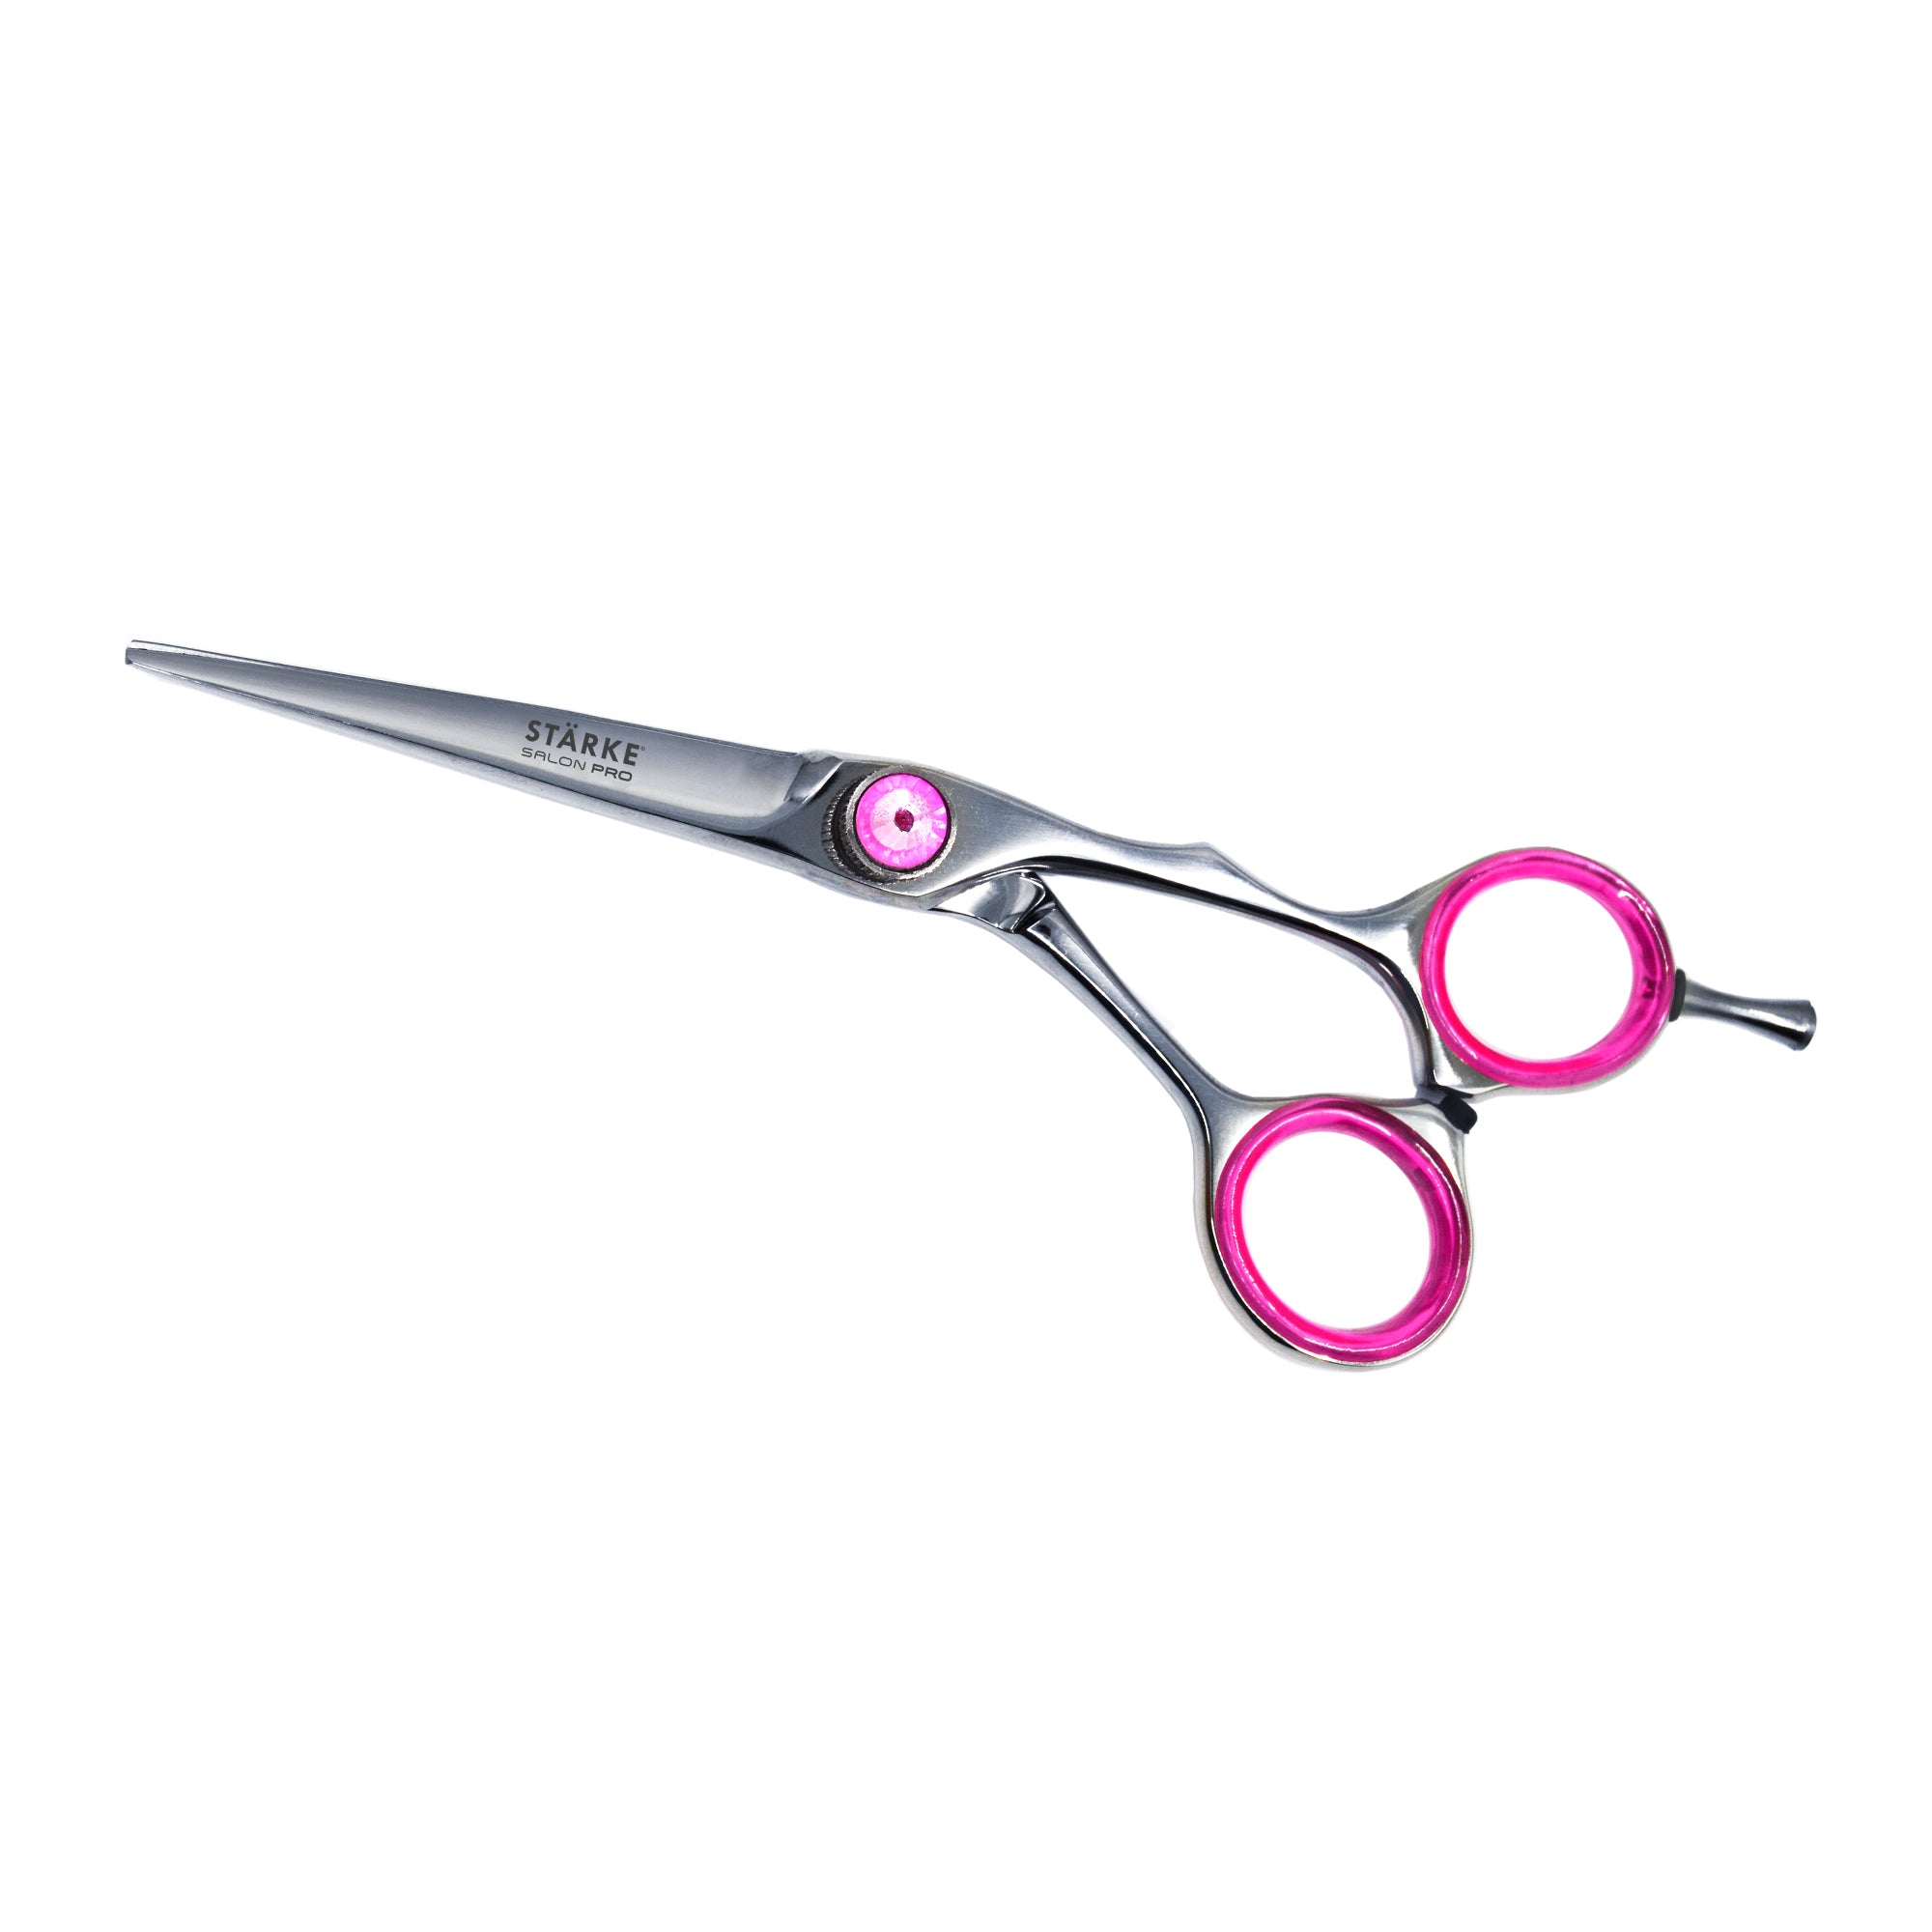 14500 Haircutting Scissors Stock Photos Pictures  RoyaltyFree Images   iStock  Chrome haircutting scissors